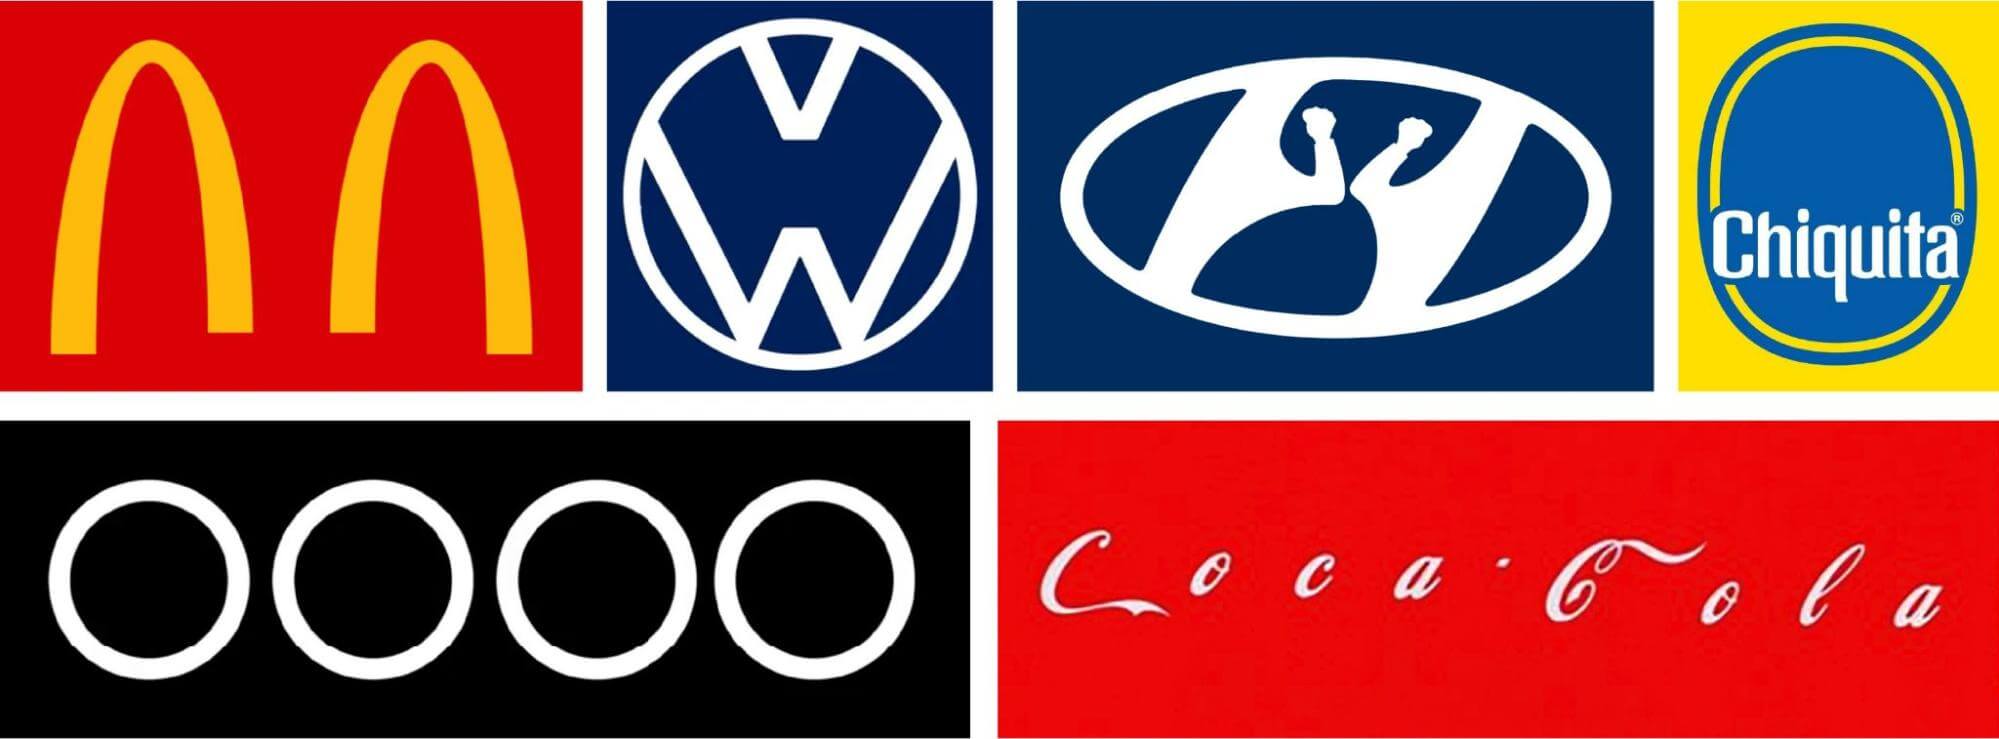 Altered logos of McDonalds, Volkswagen, and other companies with more white space between elements designed to represent social distancing